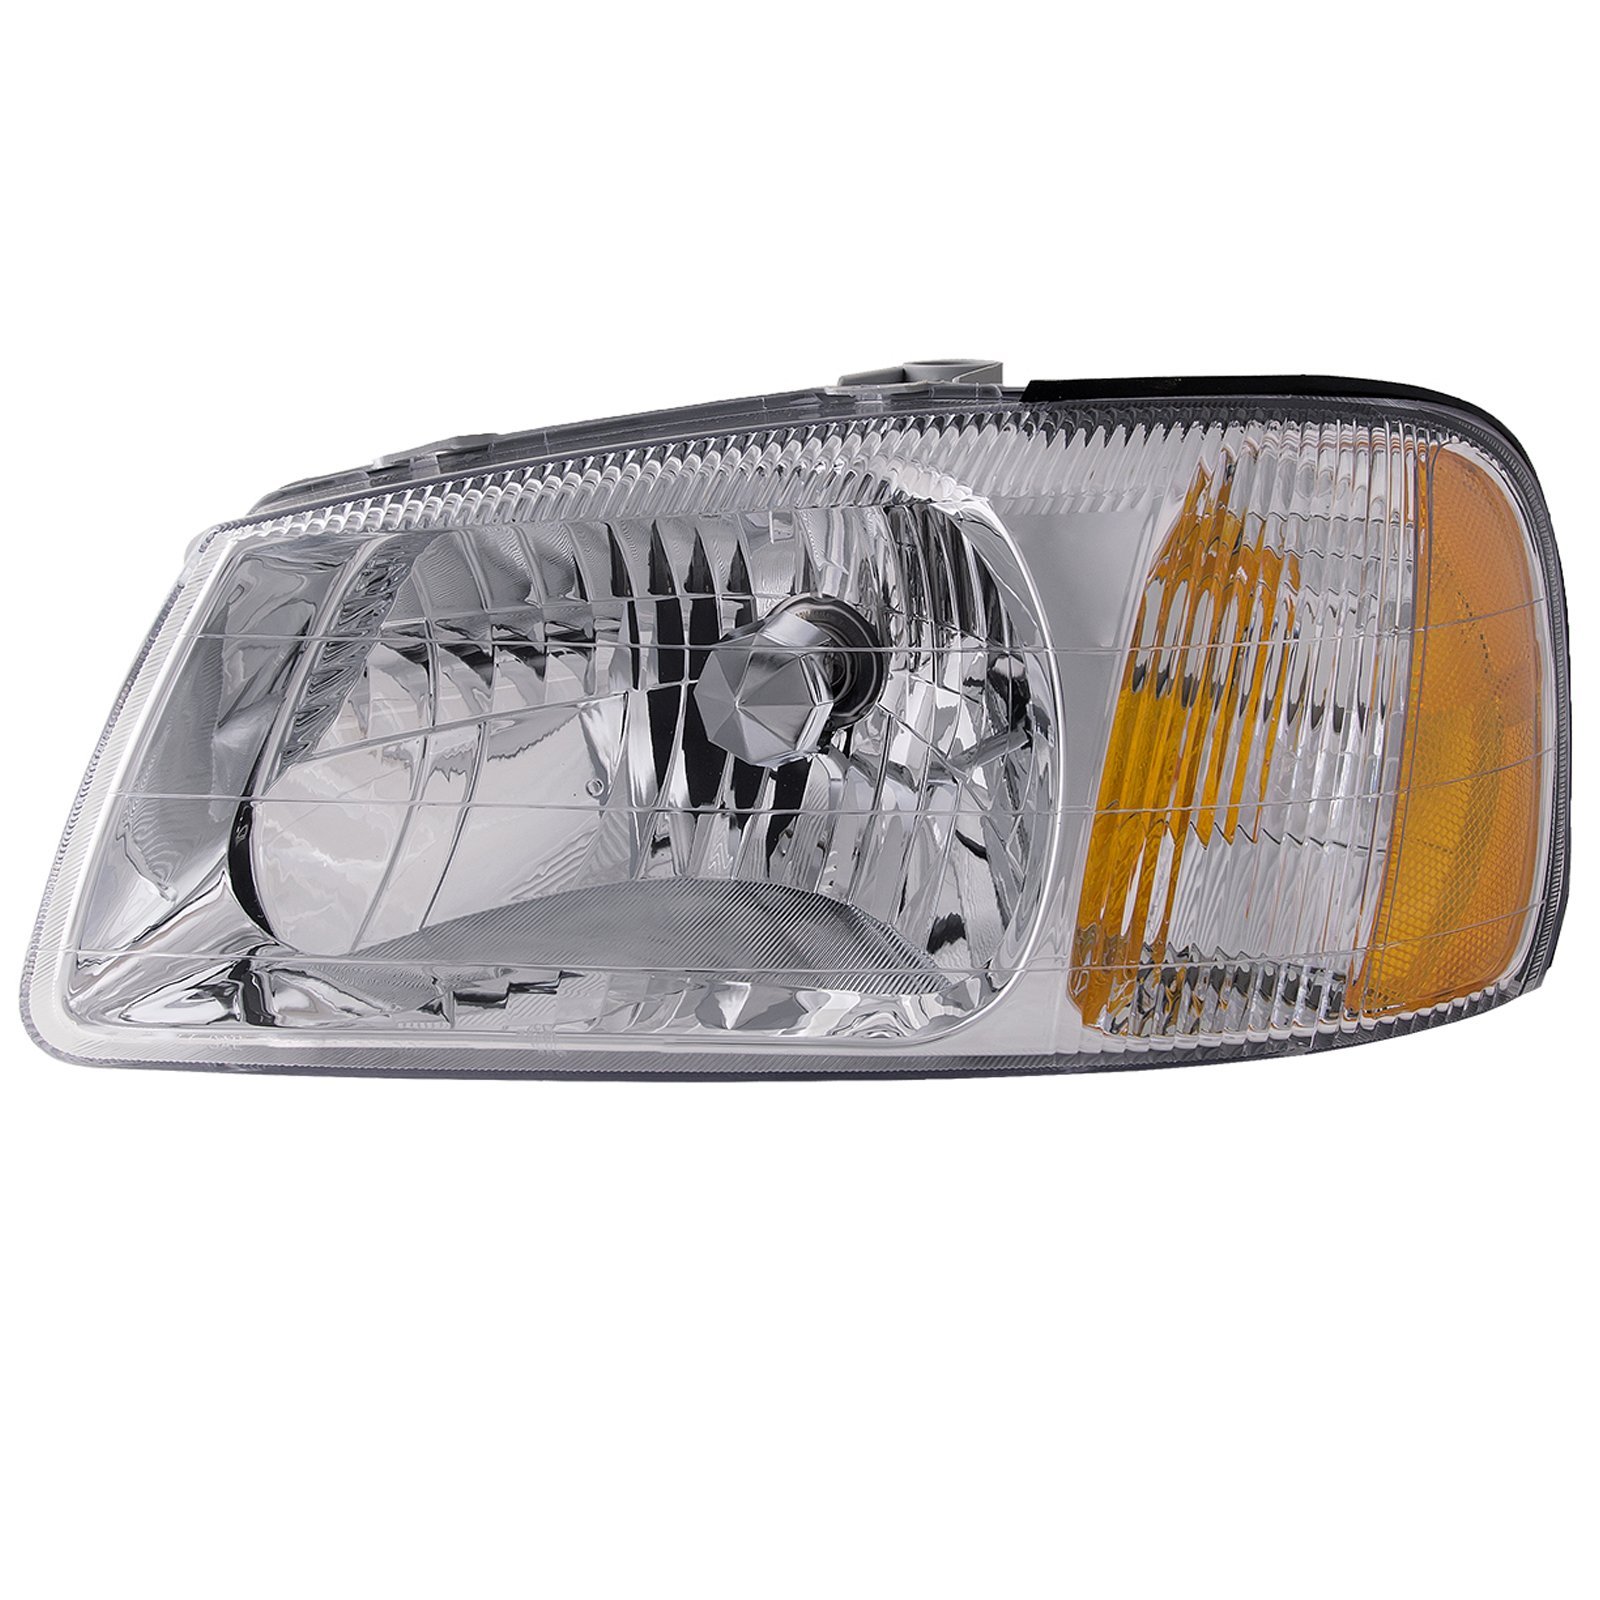 Depo 321-1118L-AS Hyundai Accent Driver Side Replacement Headlight Assembly 02-00-321-1118L-AS